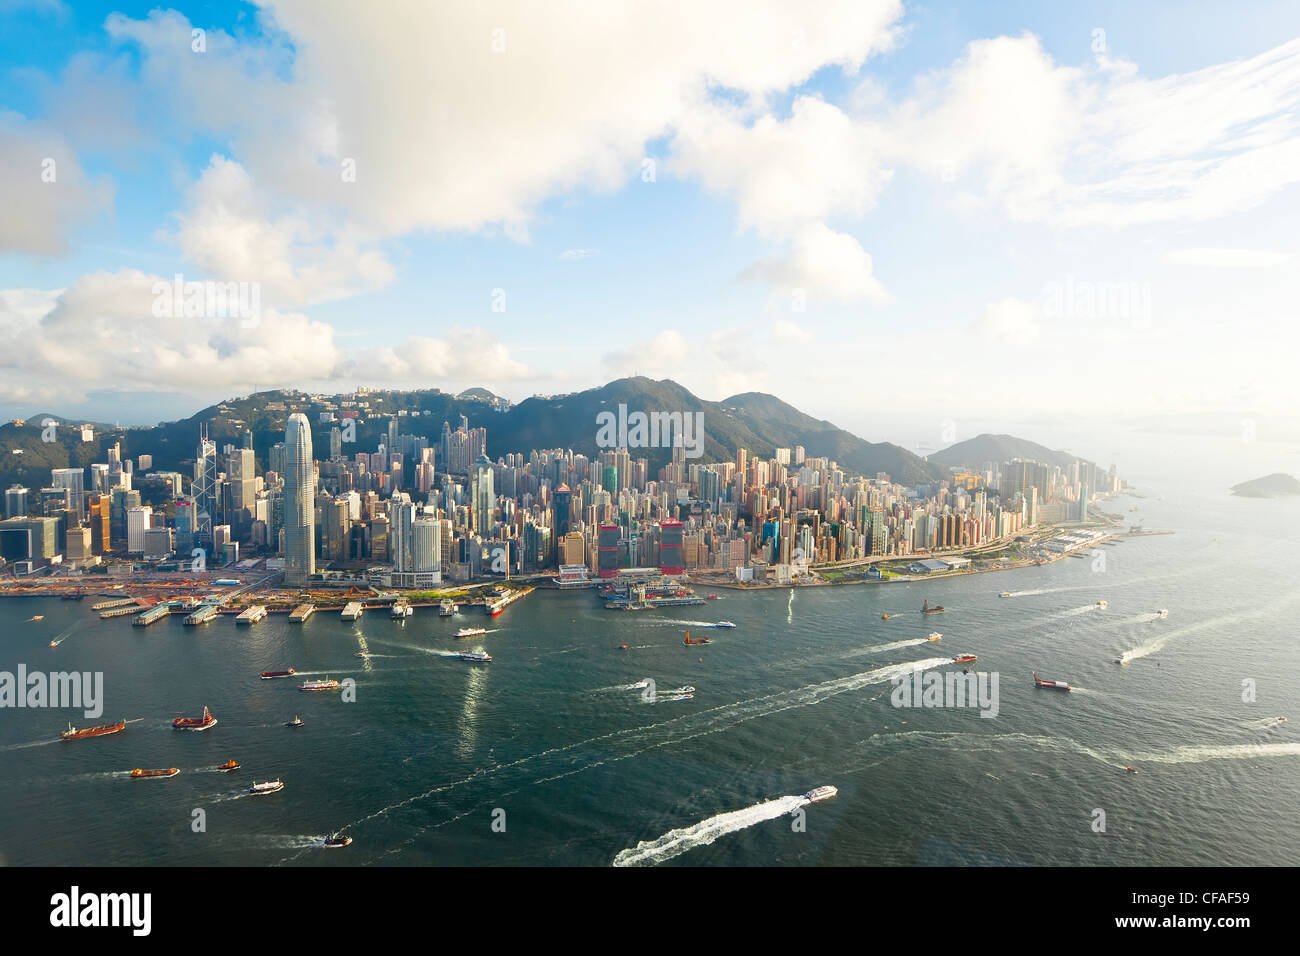 Elevated view across the busy Hong Kong harbour, Central district of Hong Kong Island and Victoria Peak, Hong Kong, China Stock Photo